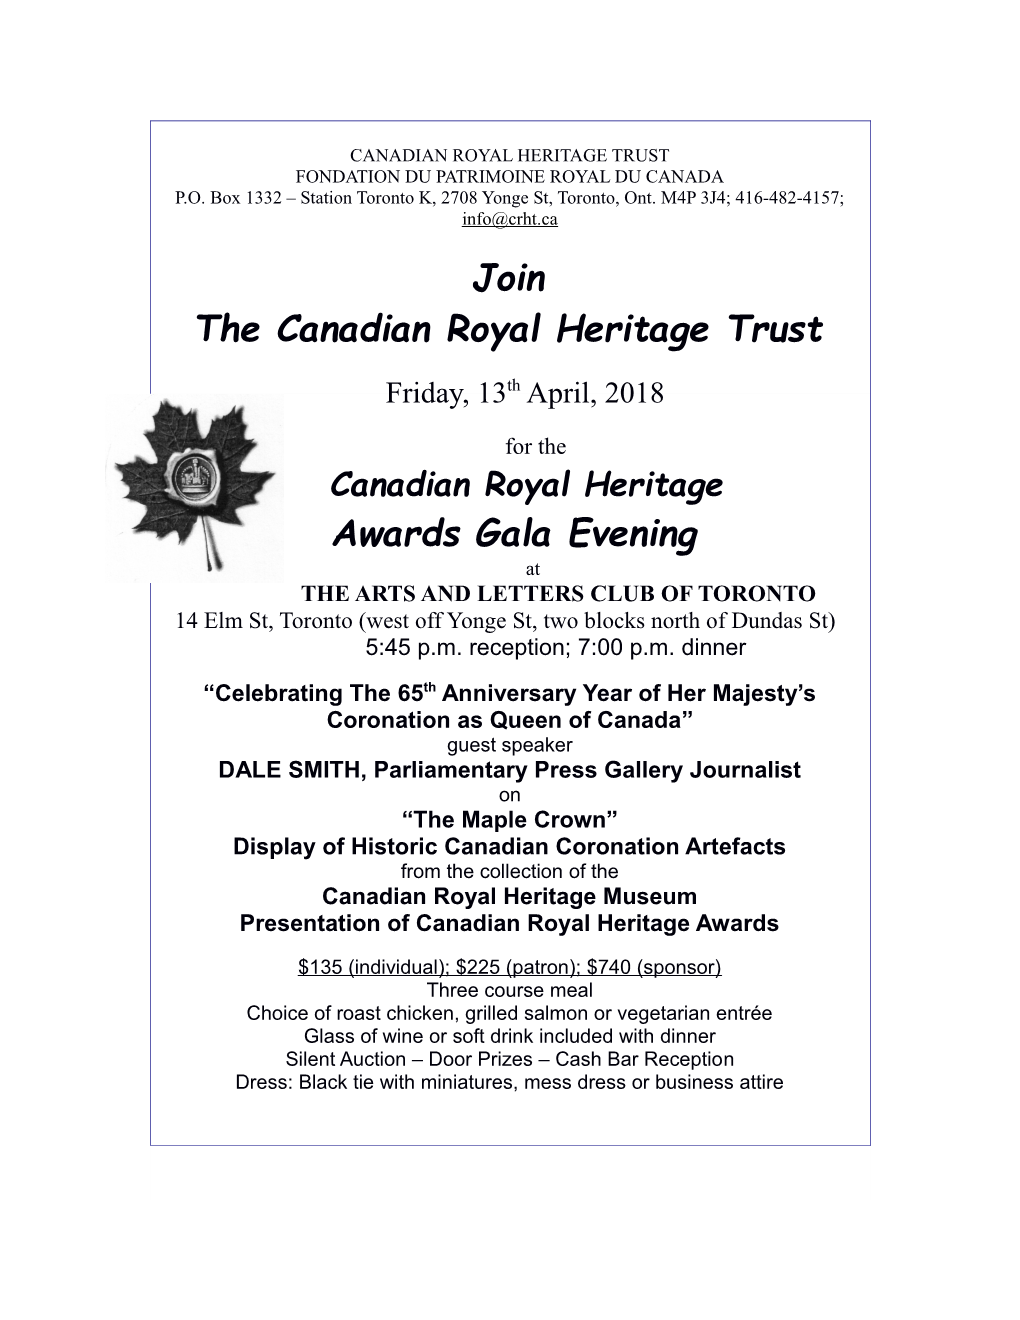 The Canadian Royal Heritage Trust